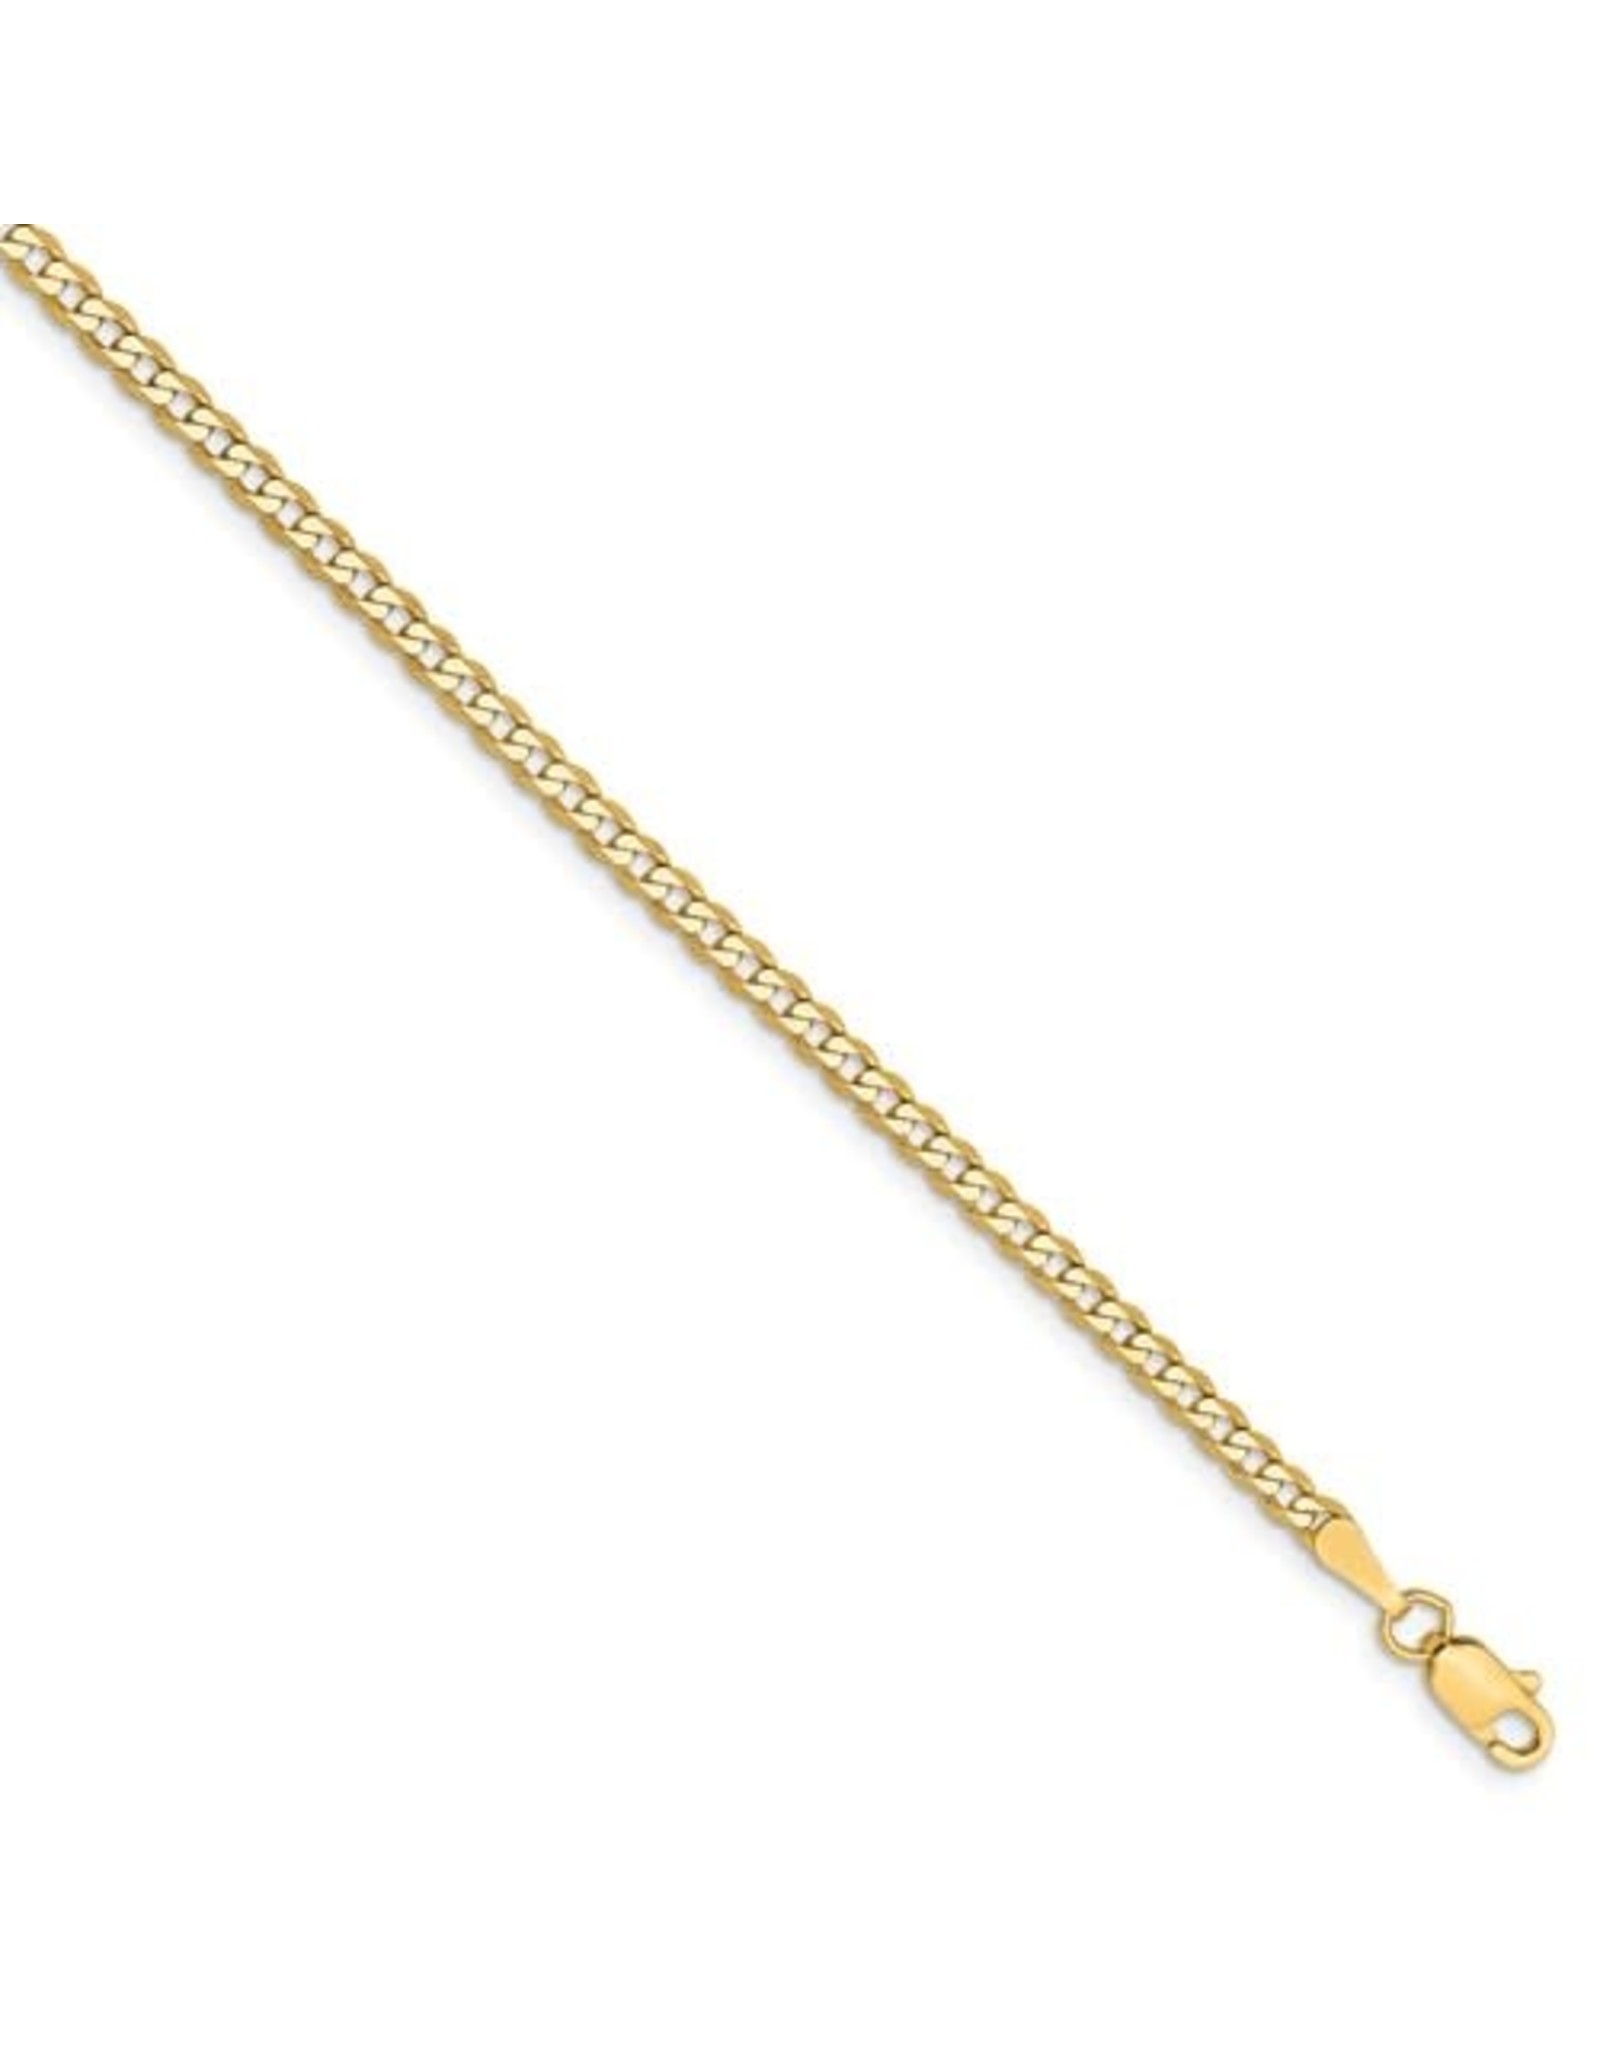 14K Yellow Gold Beveled Curb Link Anklet, 10"